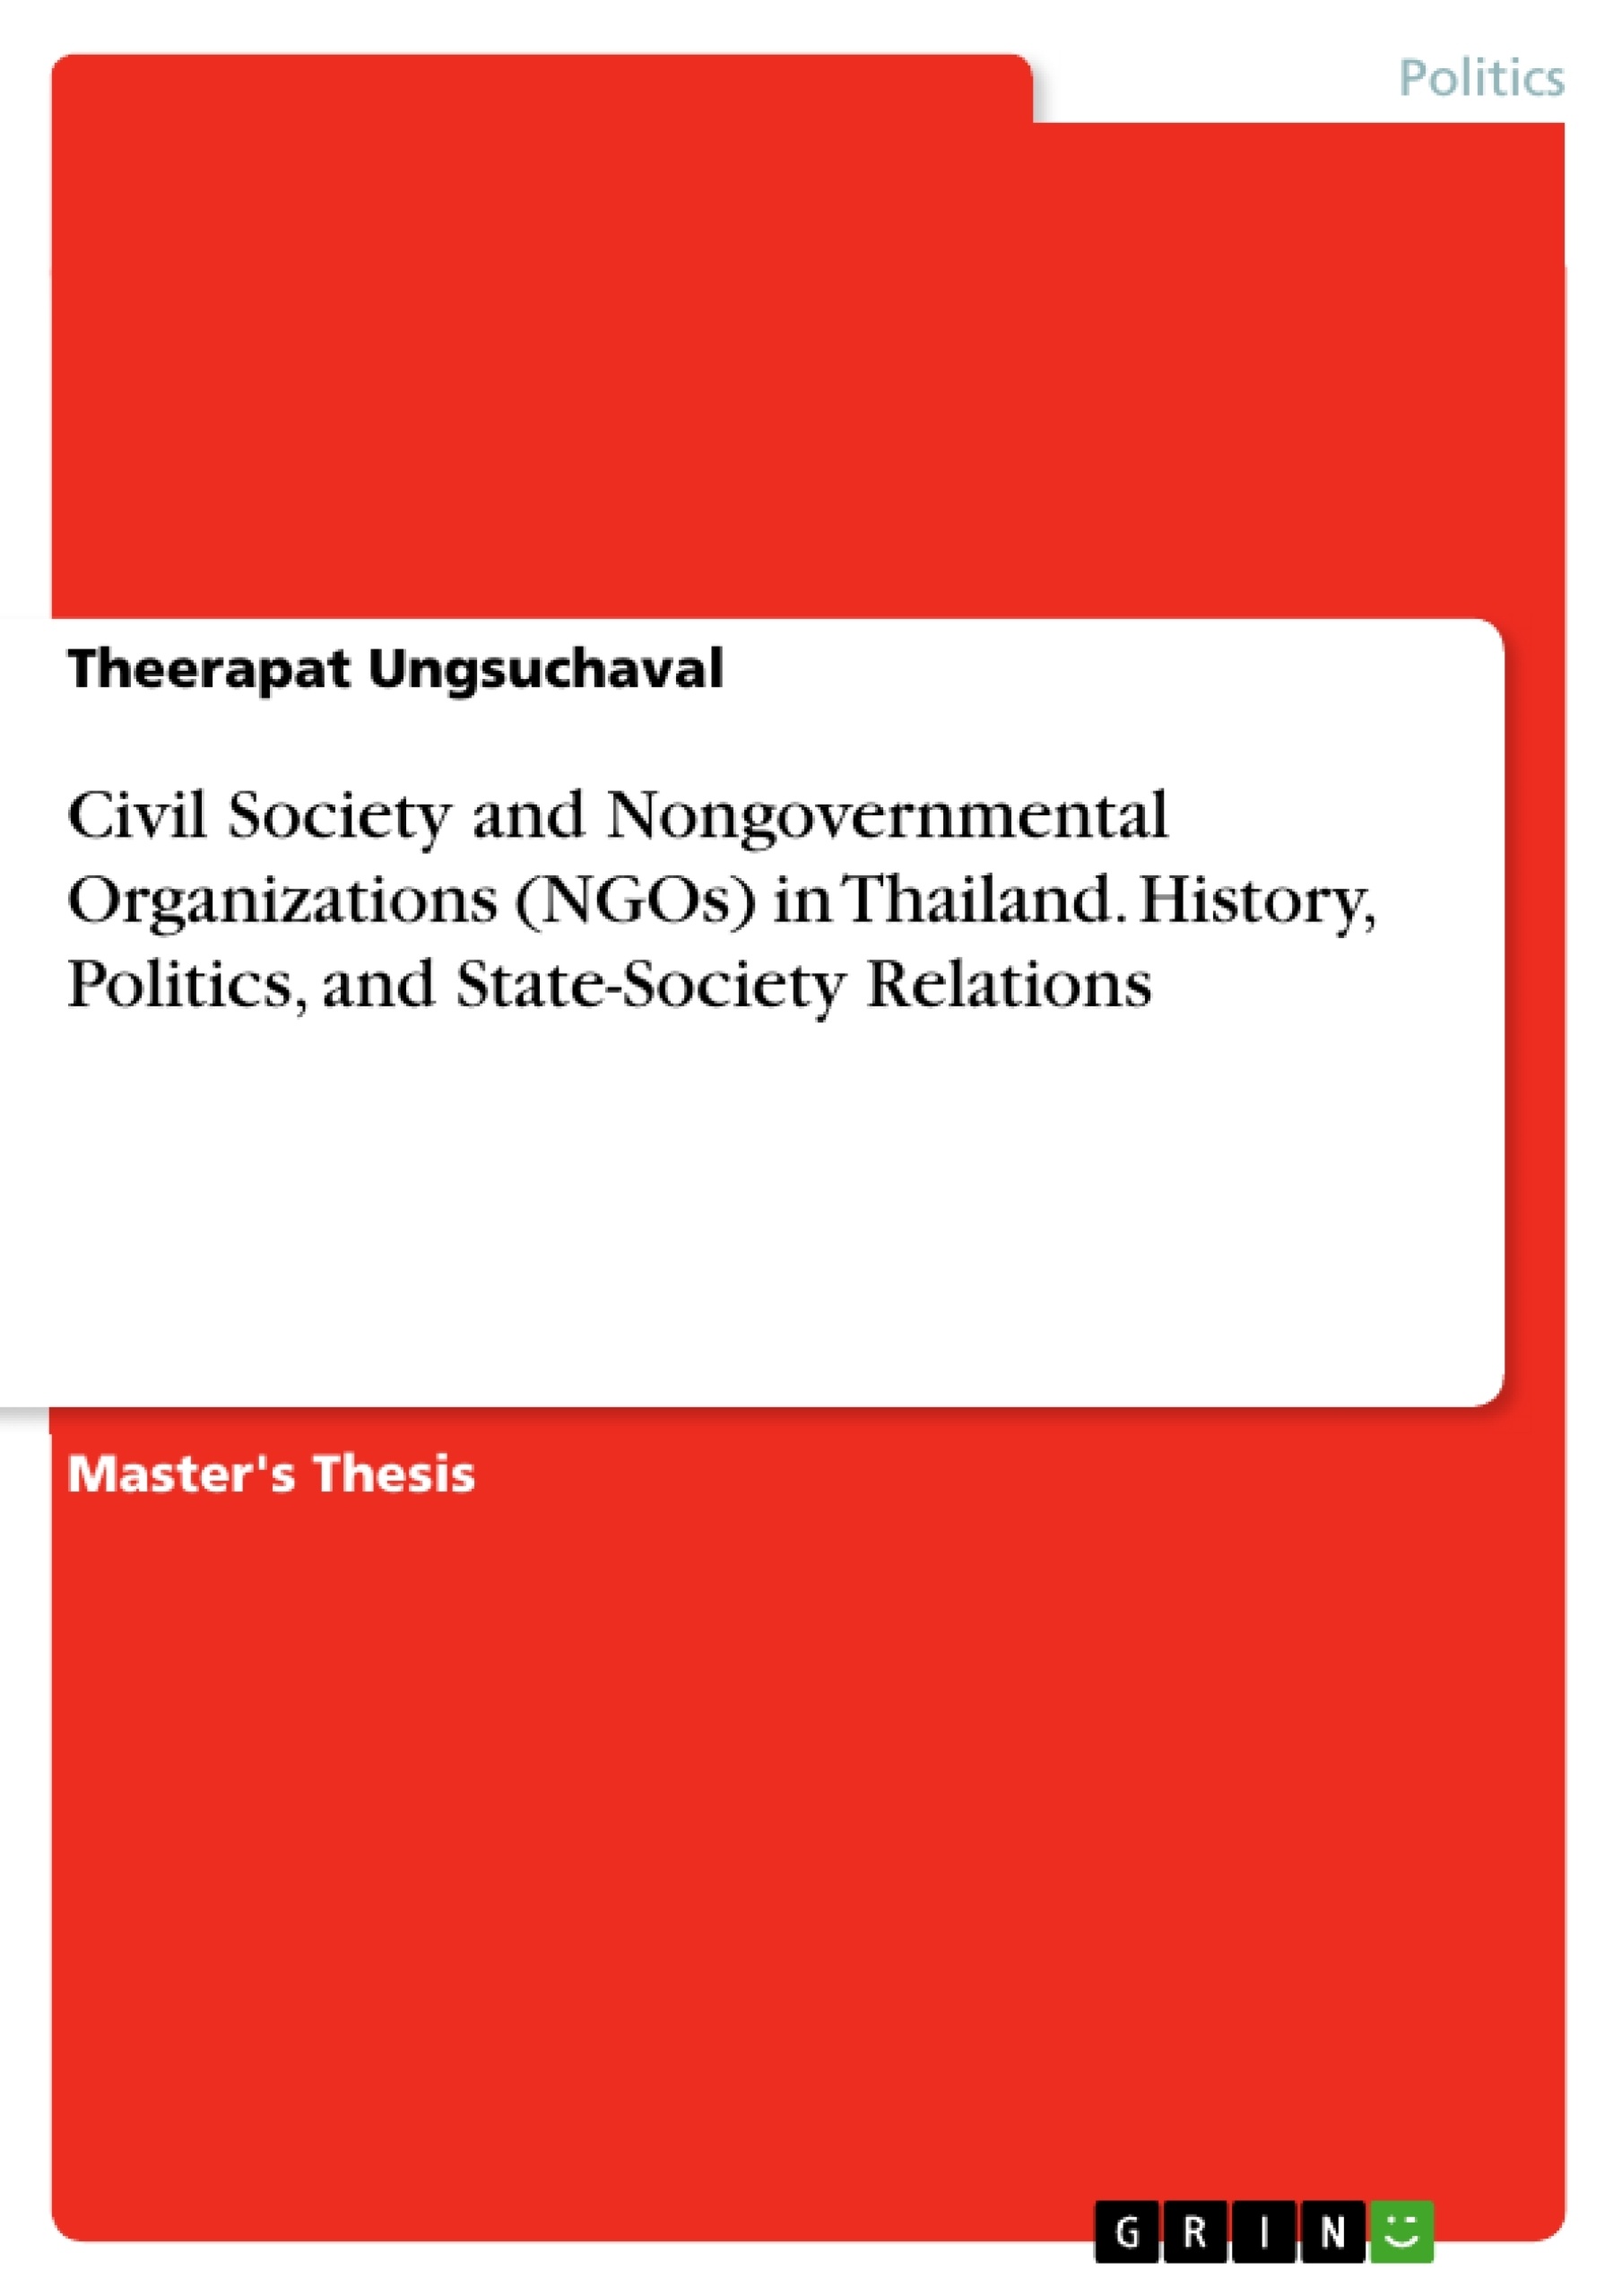 Title: Civil Society and Nongovernmental Organizations (NGOs) in Thailand. History, Politics, and State-Society Relations